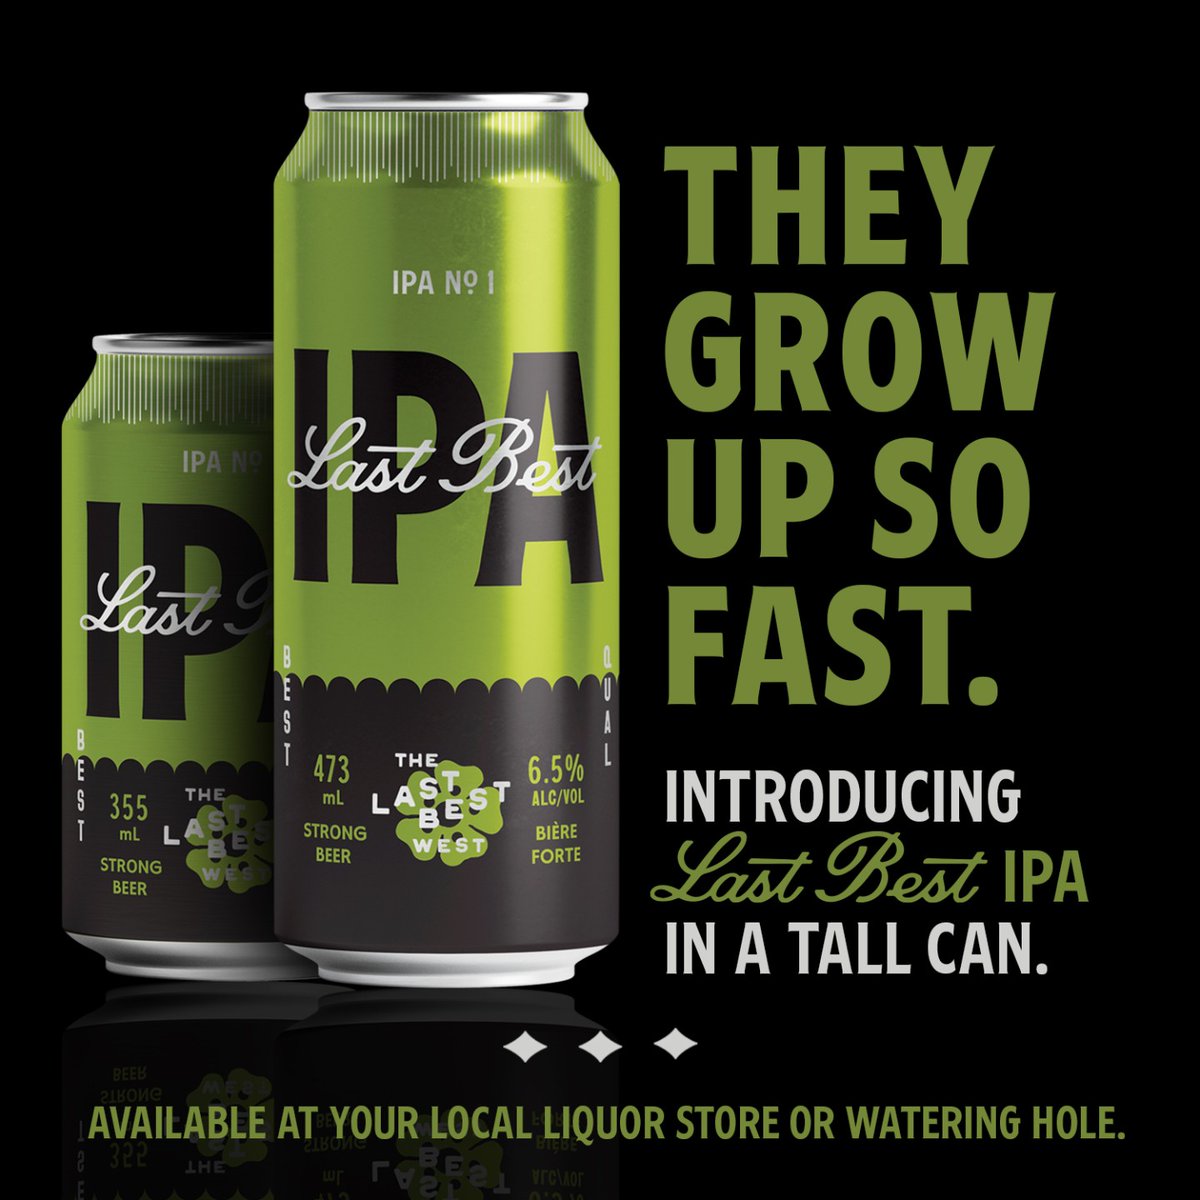 Last Best IPA is now available in a tall can, y'all! Find it at your local liquor store or watering hole here: brnw.ch/21wI8wg #YYC